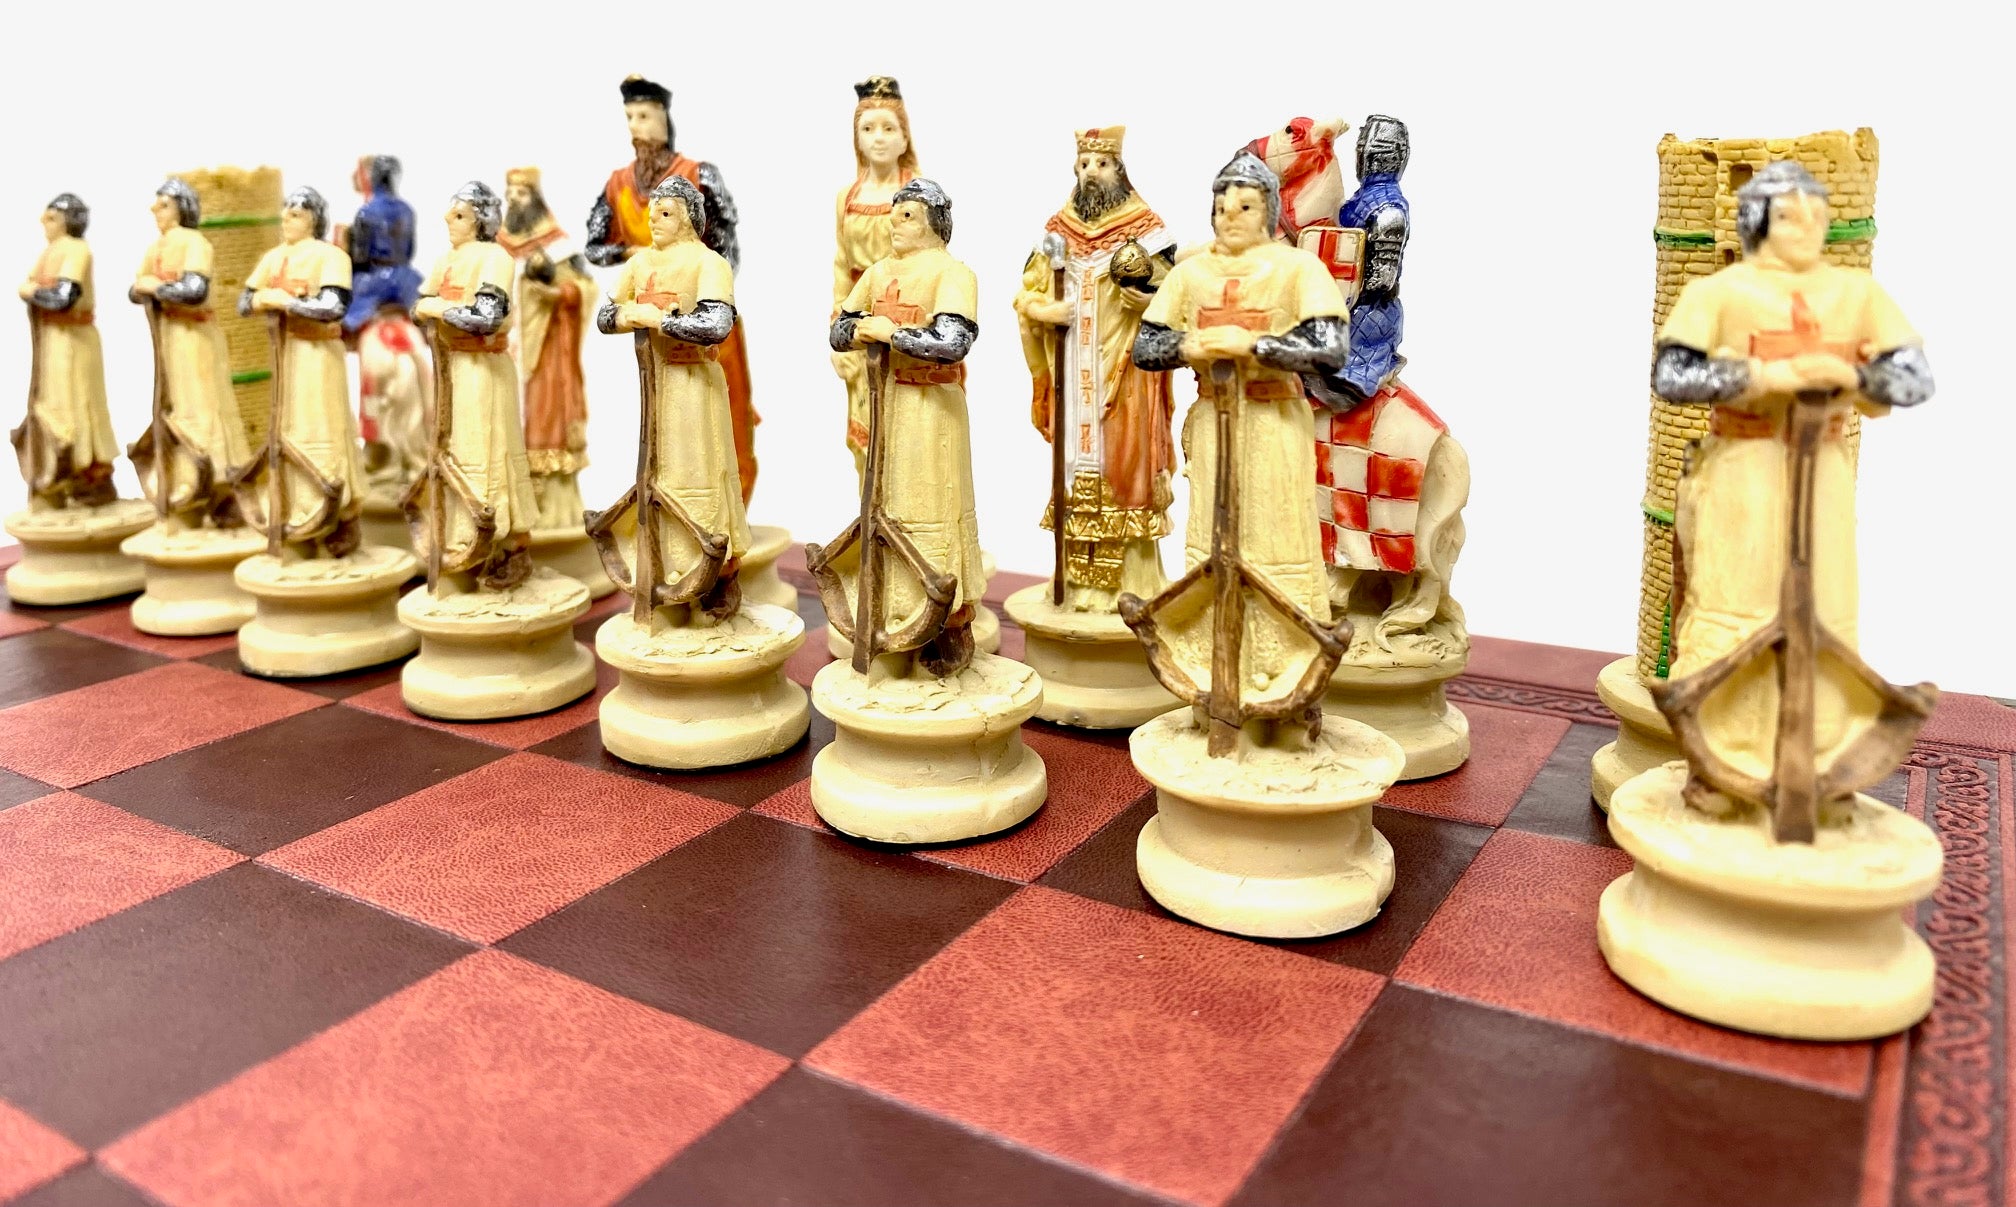 4-WAY Chess Set 4-player Chess Board Games Medieval Chess Set With